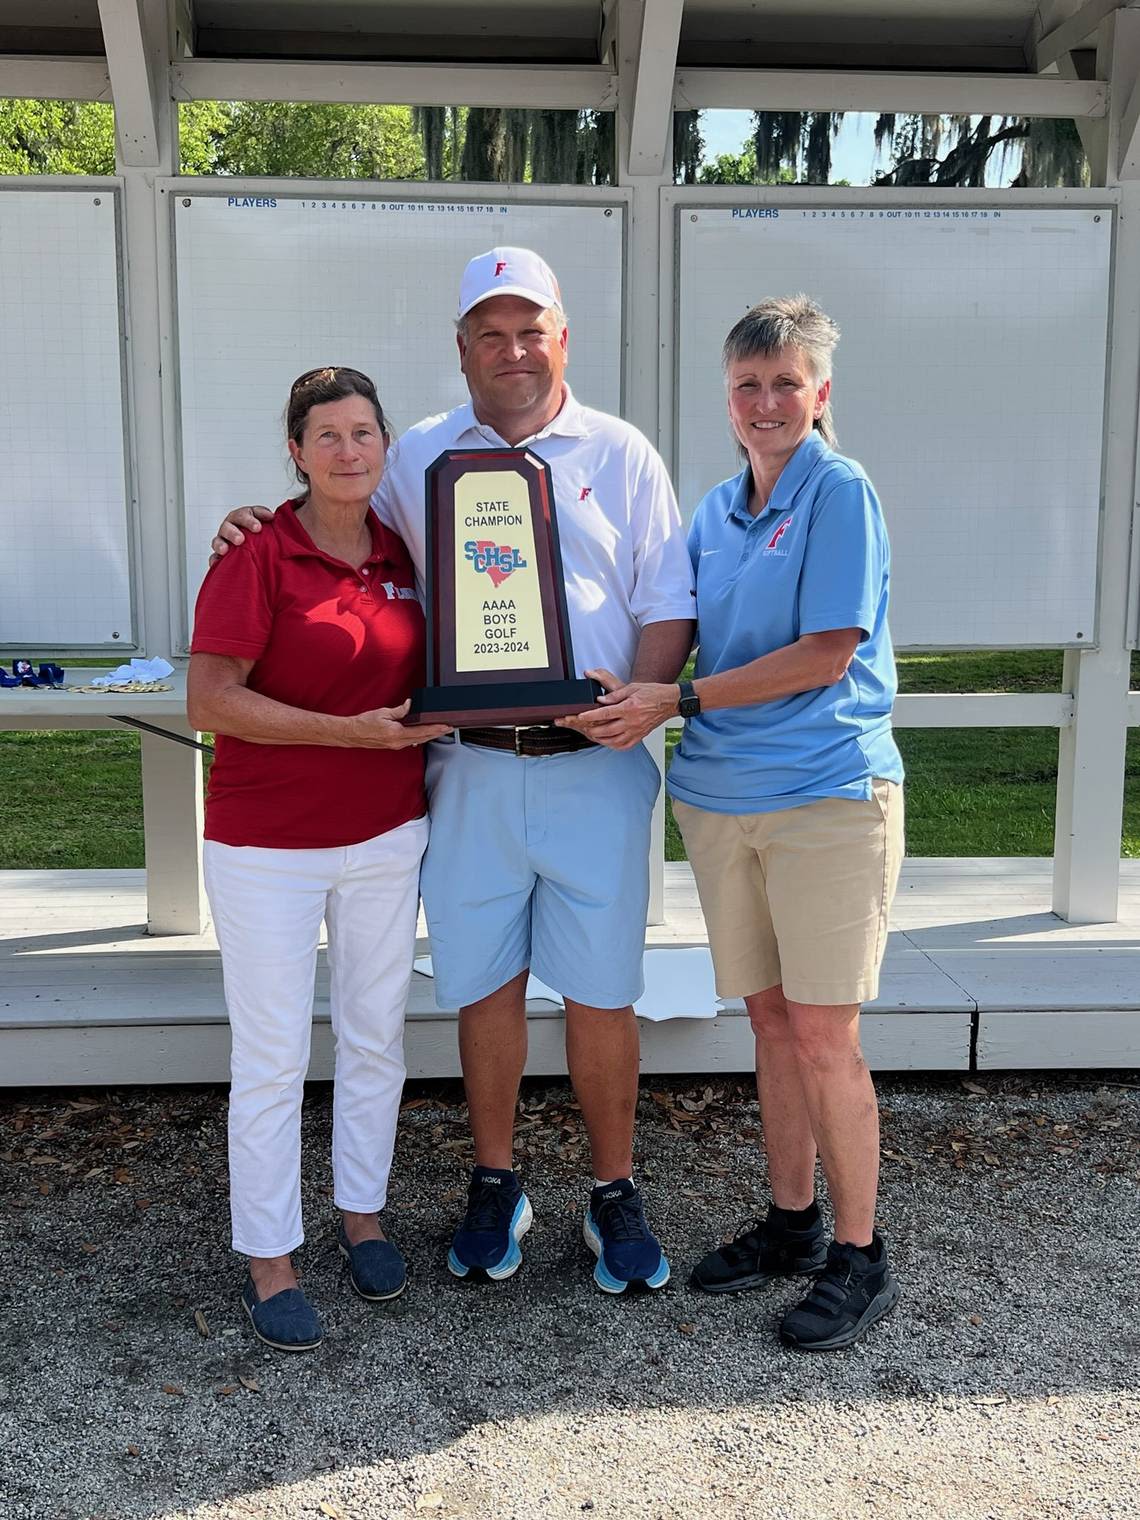 AC Flora golf coach stepping down after rewarding experience with Falcons